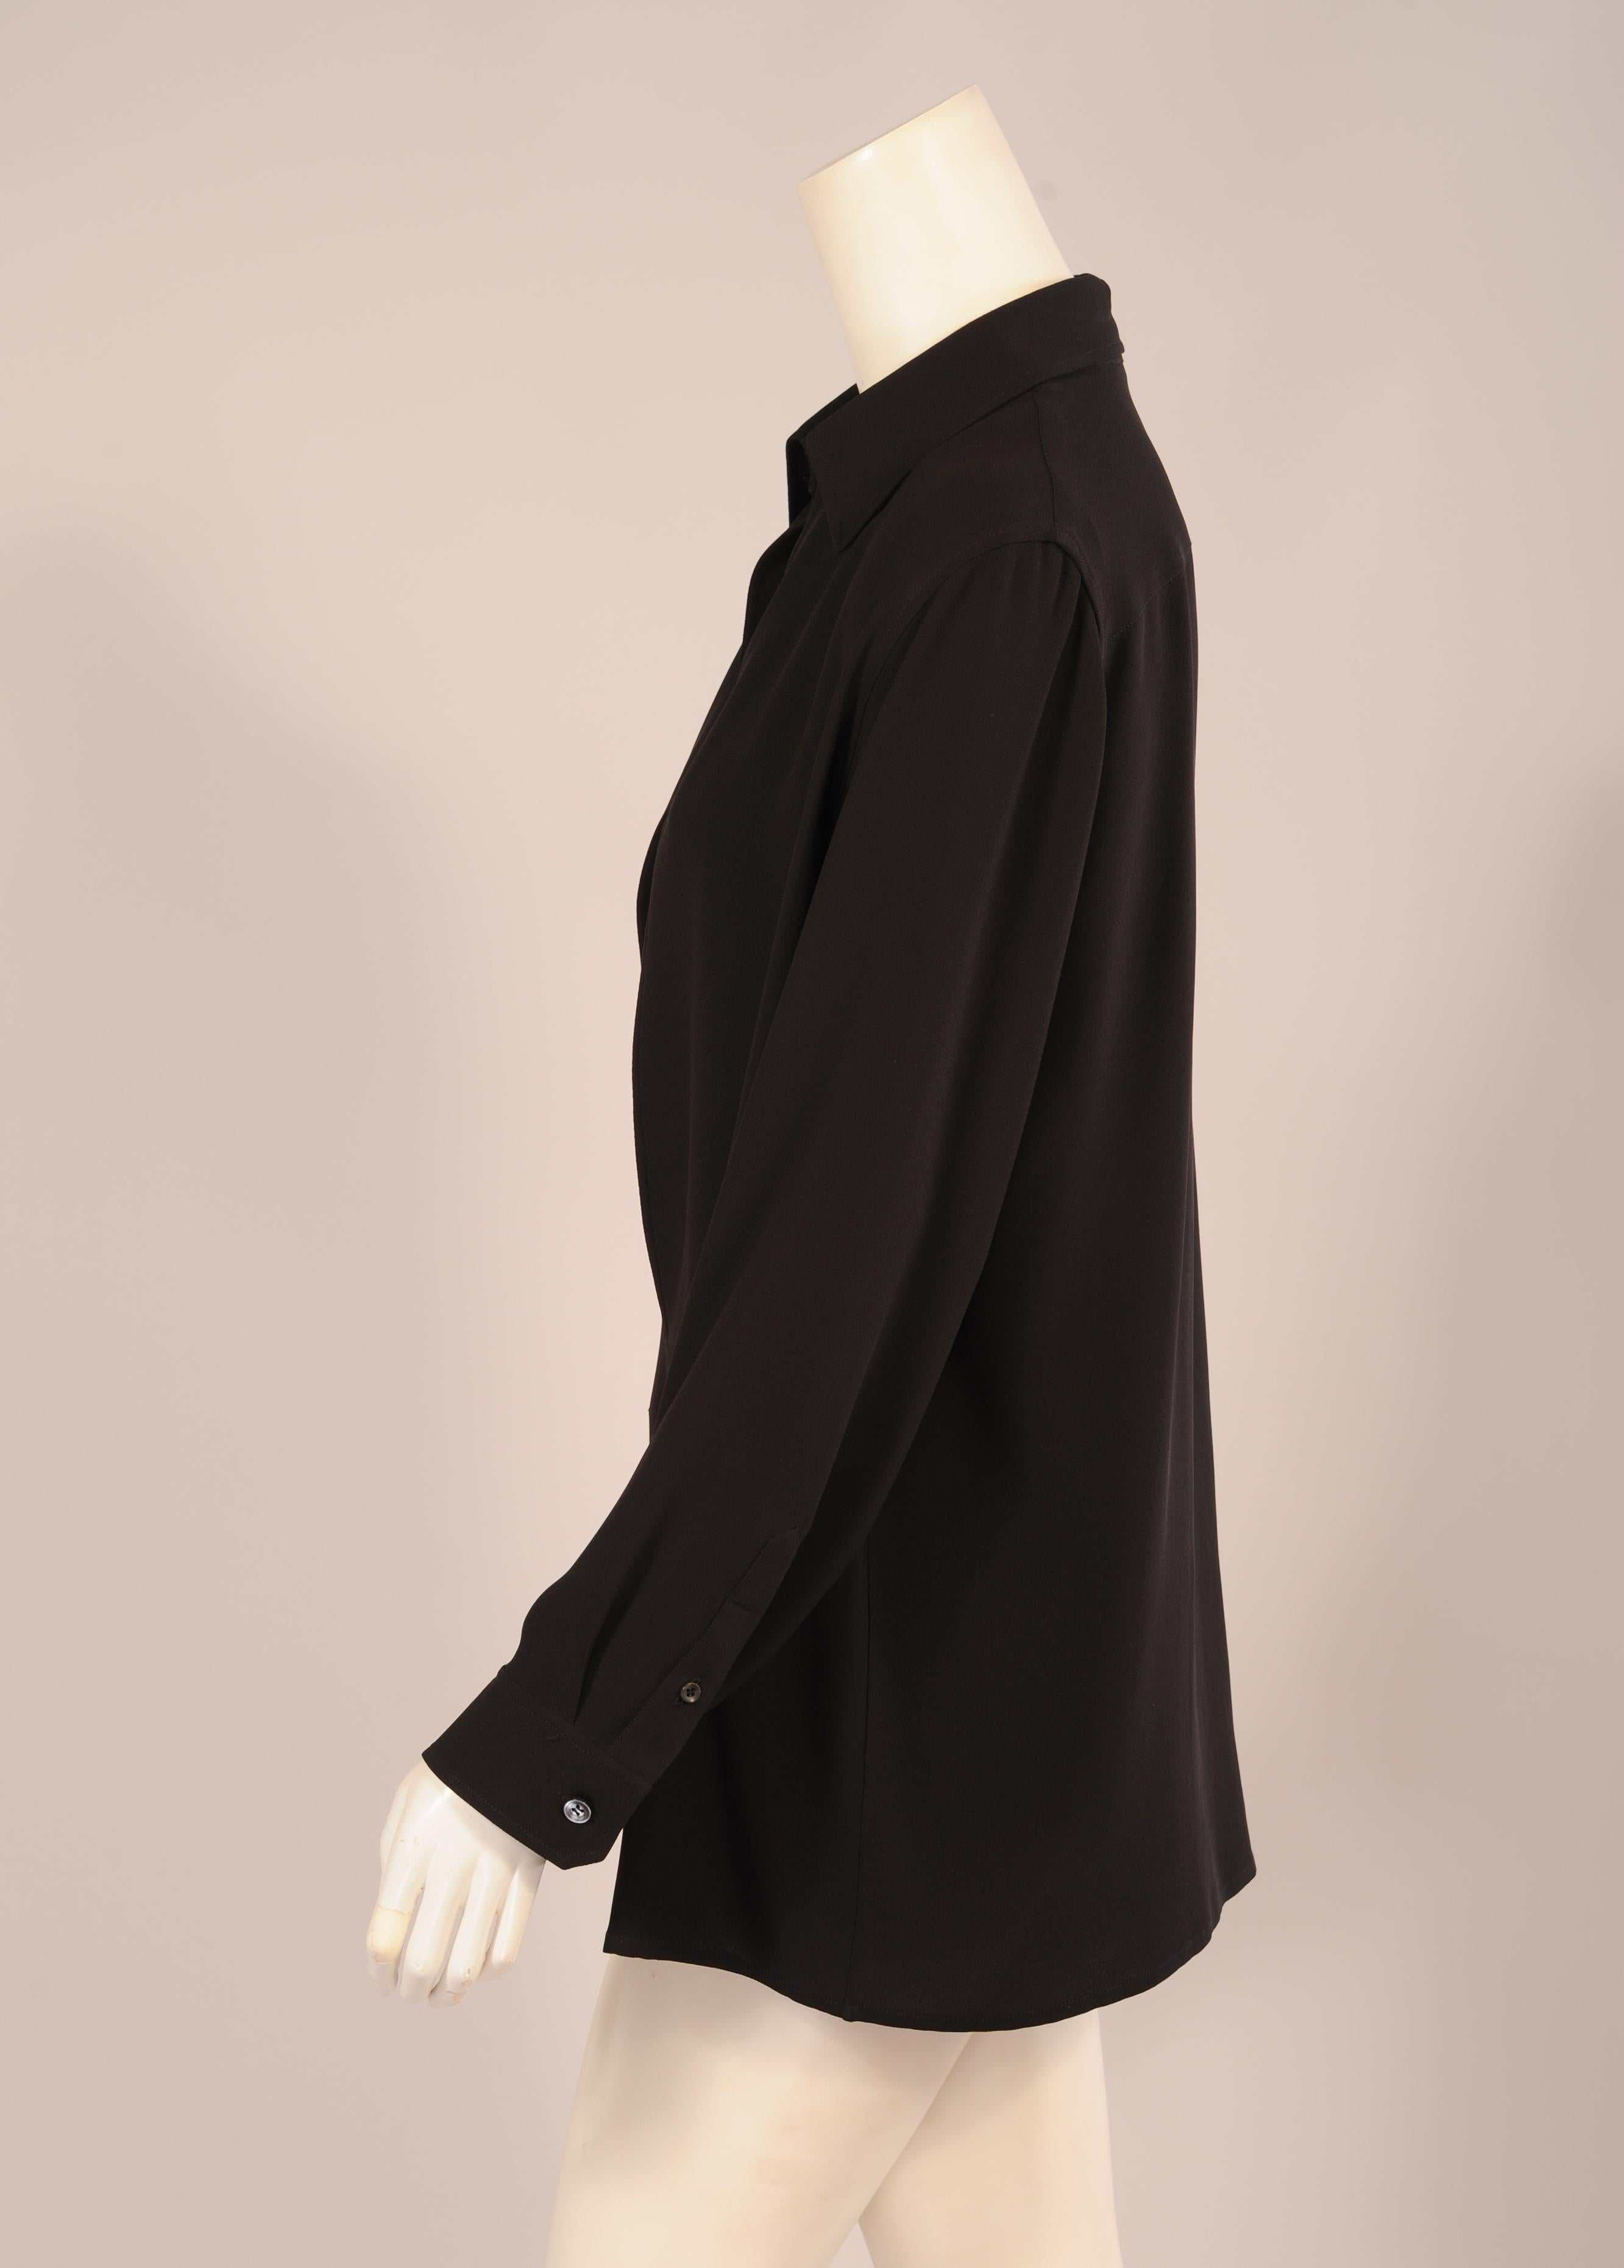 So chic and elegant, this understated and oversized black silk tunic from Hermes has a pointed collar and two button cuffs.  The distinguishing design element that makes it so wonderful is the very deep opening at the center front where the button